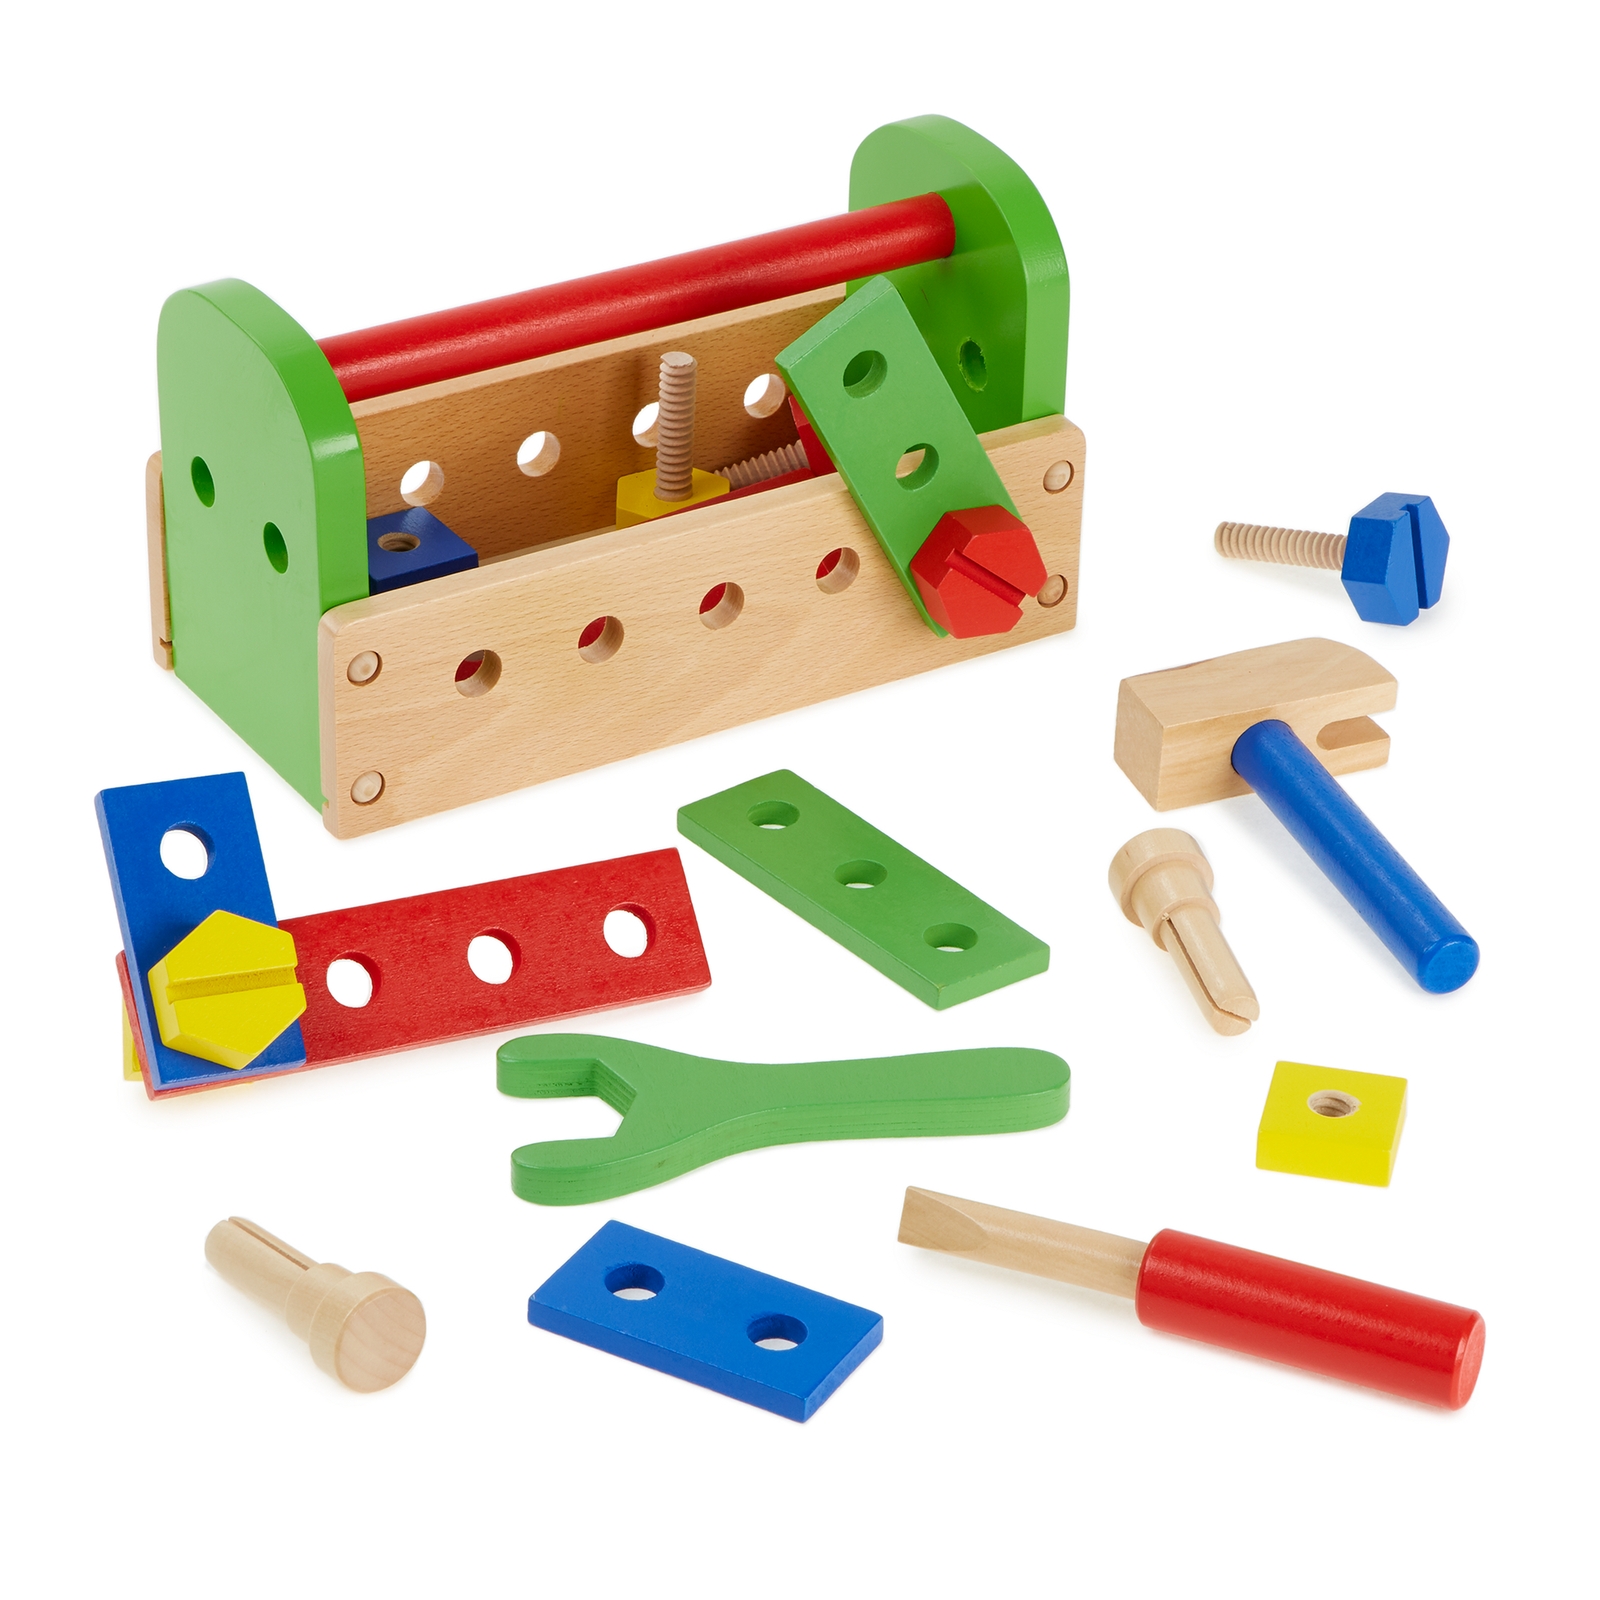 Wooden Construction Role Play Tool Box - Assorted - Set of 24